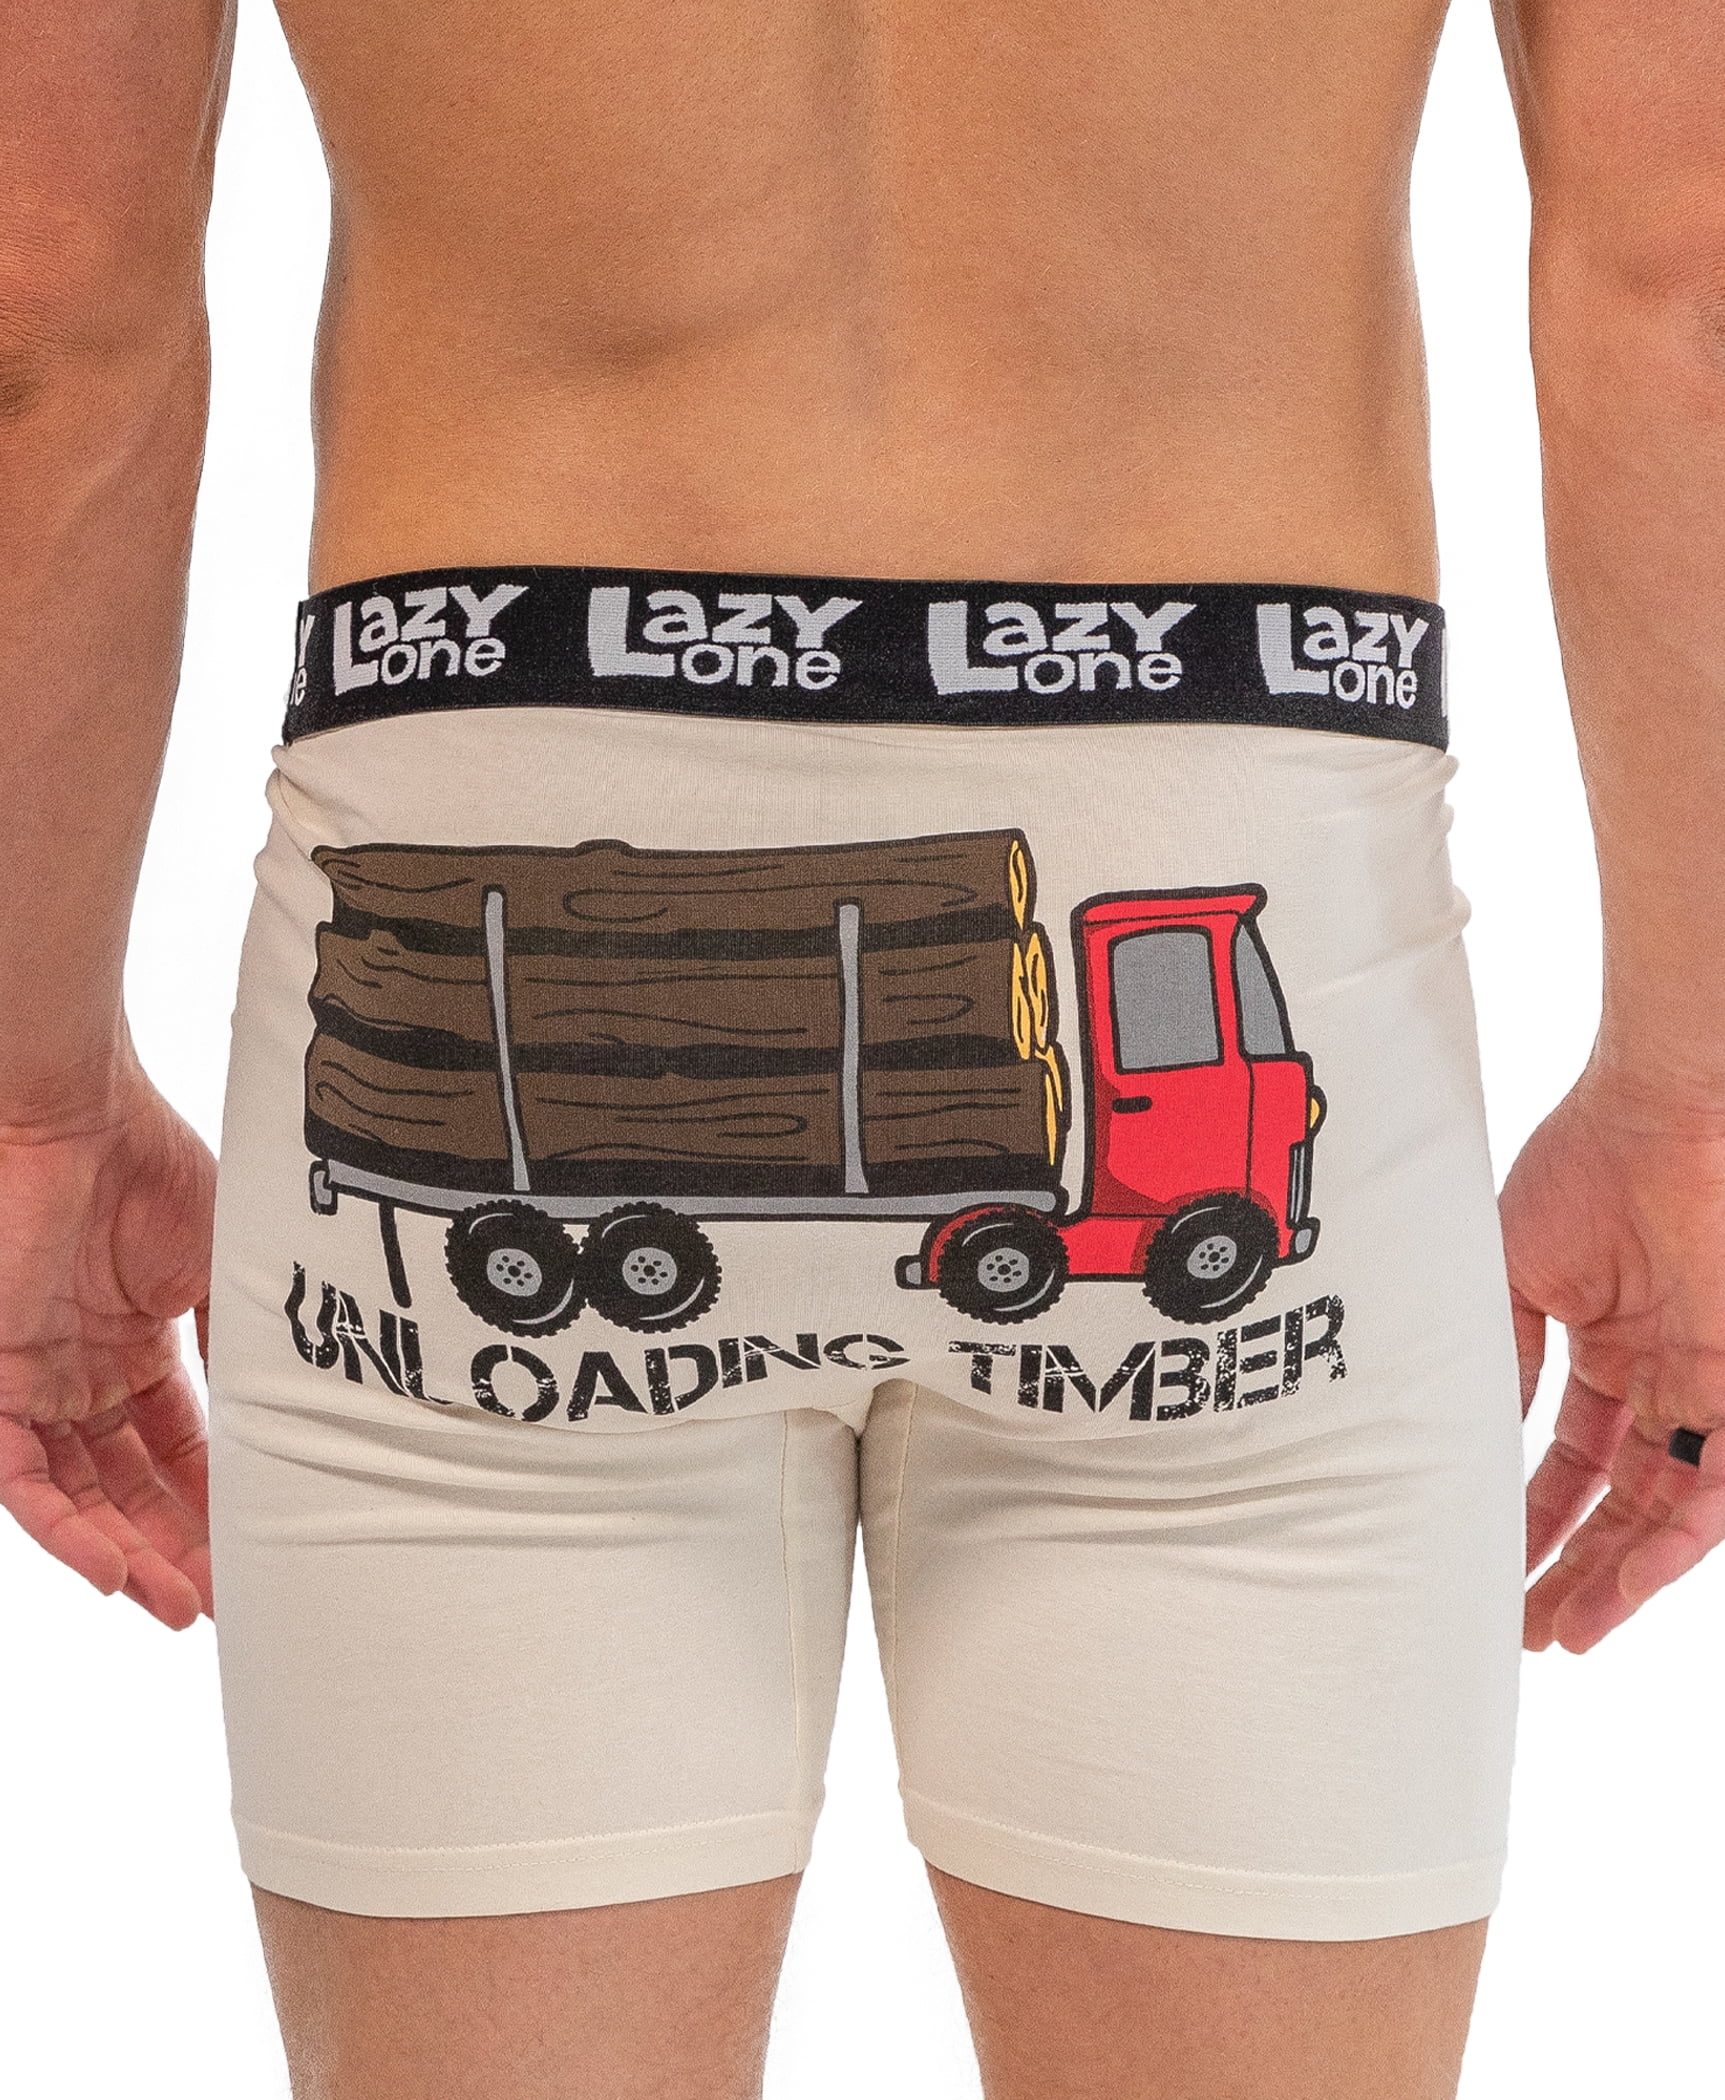 Guys Super Soft Funny Underwear Mens Boxers by LazyOne